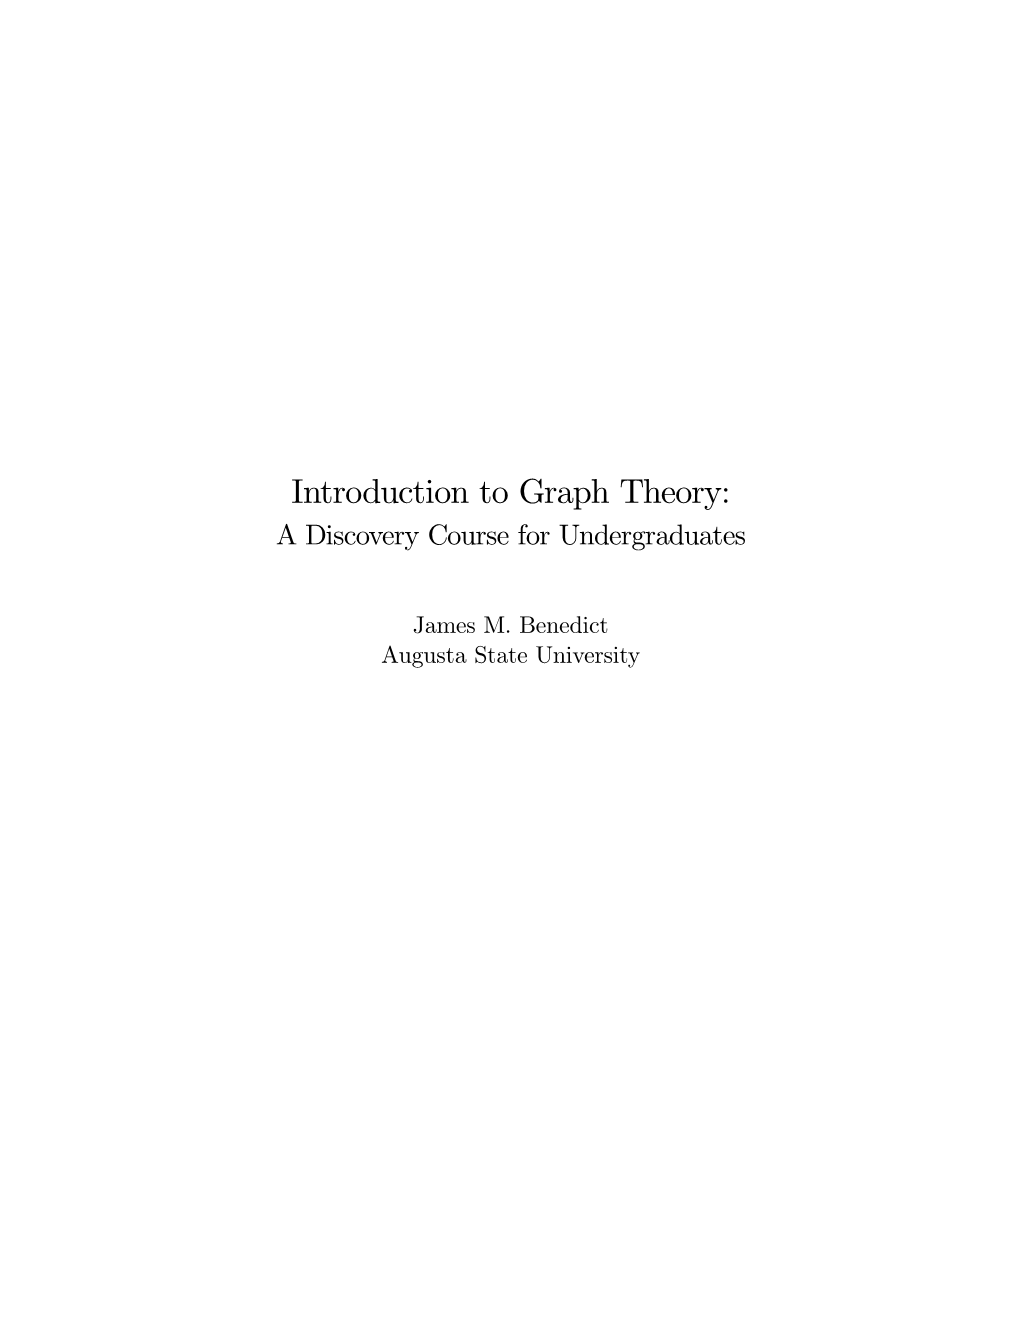 Introduction to Graph Theory: a Discovery Course for Undergraduates